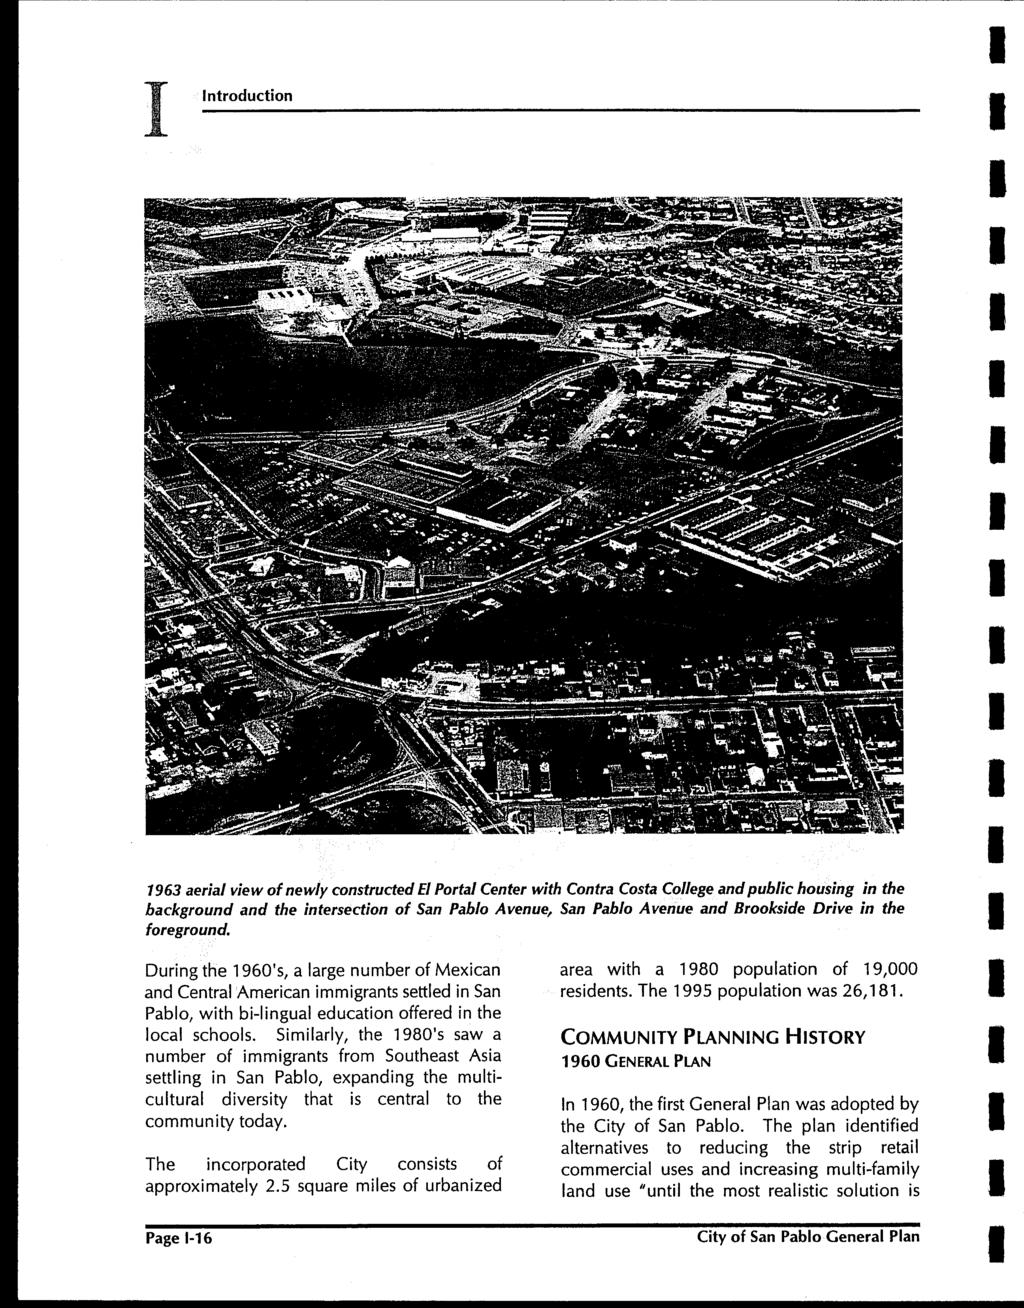 ntroducton 1963 aeral vew ofnewly constructed E Portal Center wth Contra Costa College and publc housng n the background and the ntersecton of San Pablo Avenue San Pablo Avenue and Brooksde Drve n